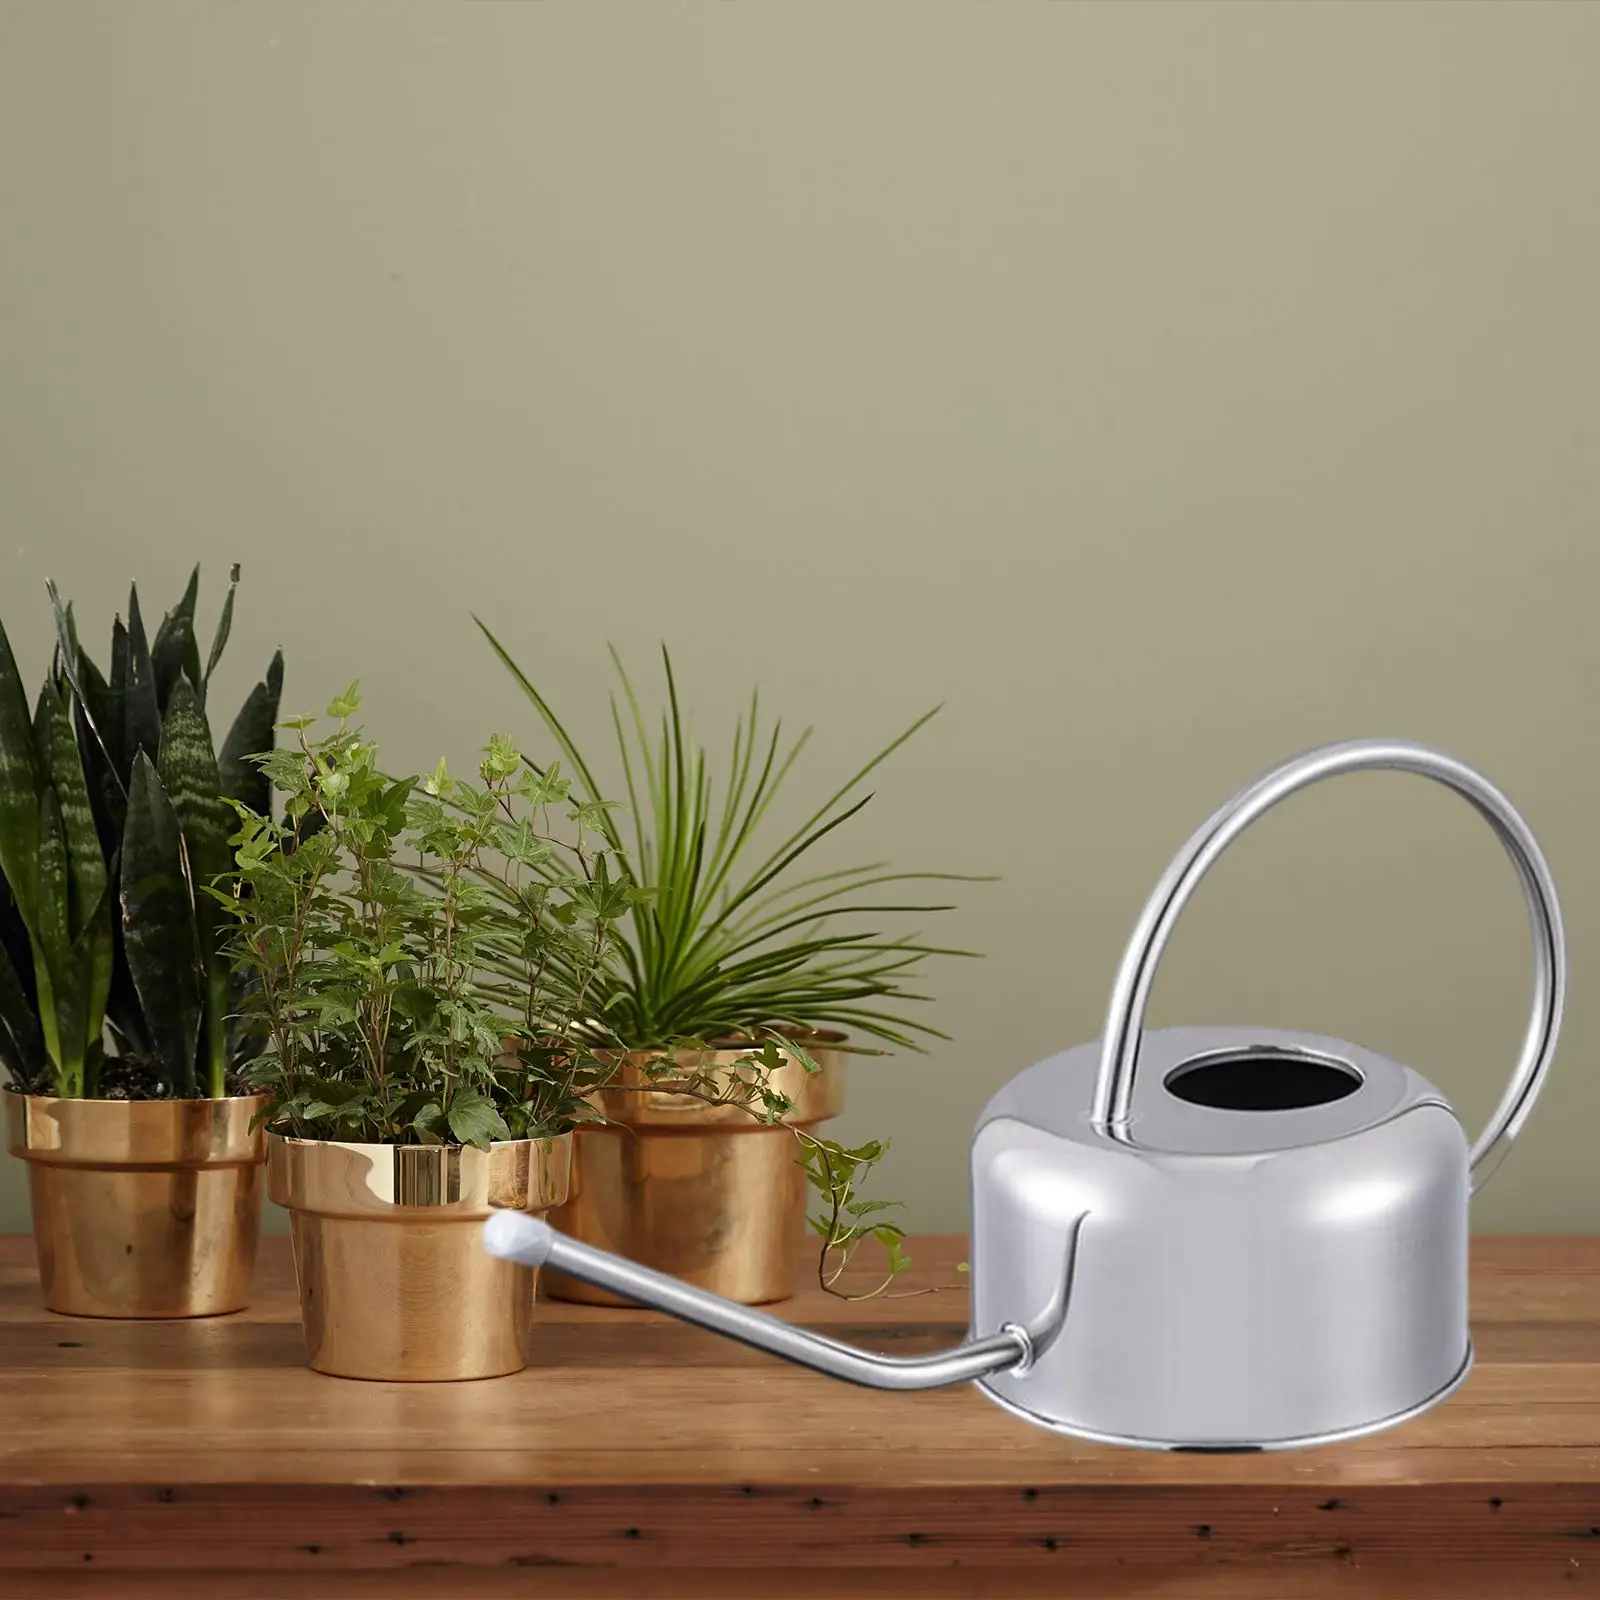 Long Spout Watering Can Slender Nozzle Plants Shower Small Kettle Sprinkling Pot for Small Fruit Home Bonsai Friends Gardeners